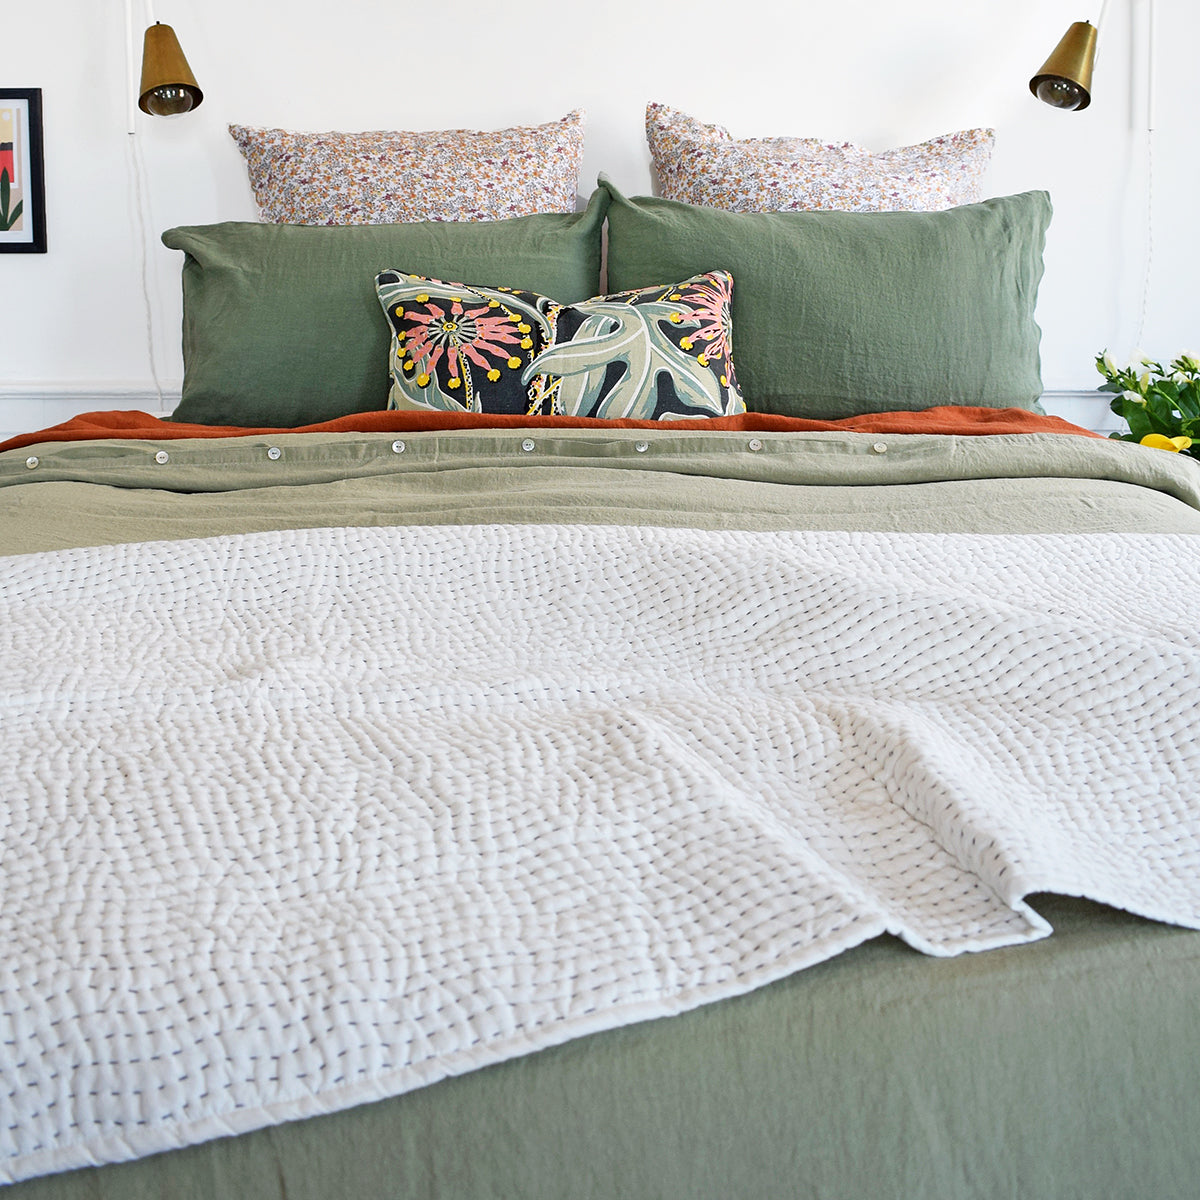 A Linge Particulier Linen Duvet in Fennel gives a olive and camo color to this duvet for a green colorful linen bedding look from Collyer's Mansion